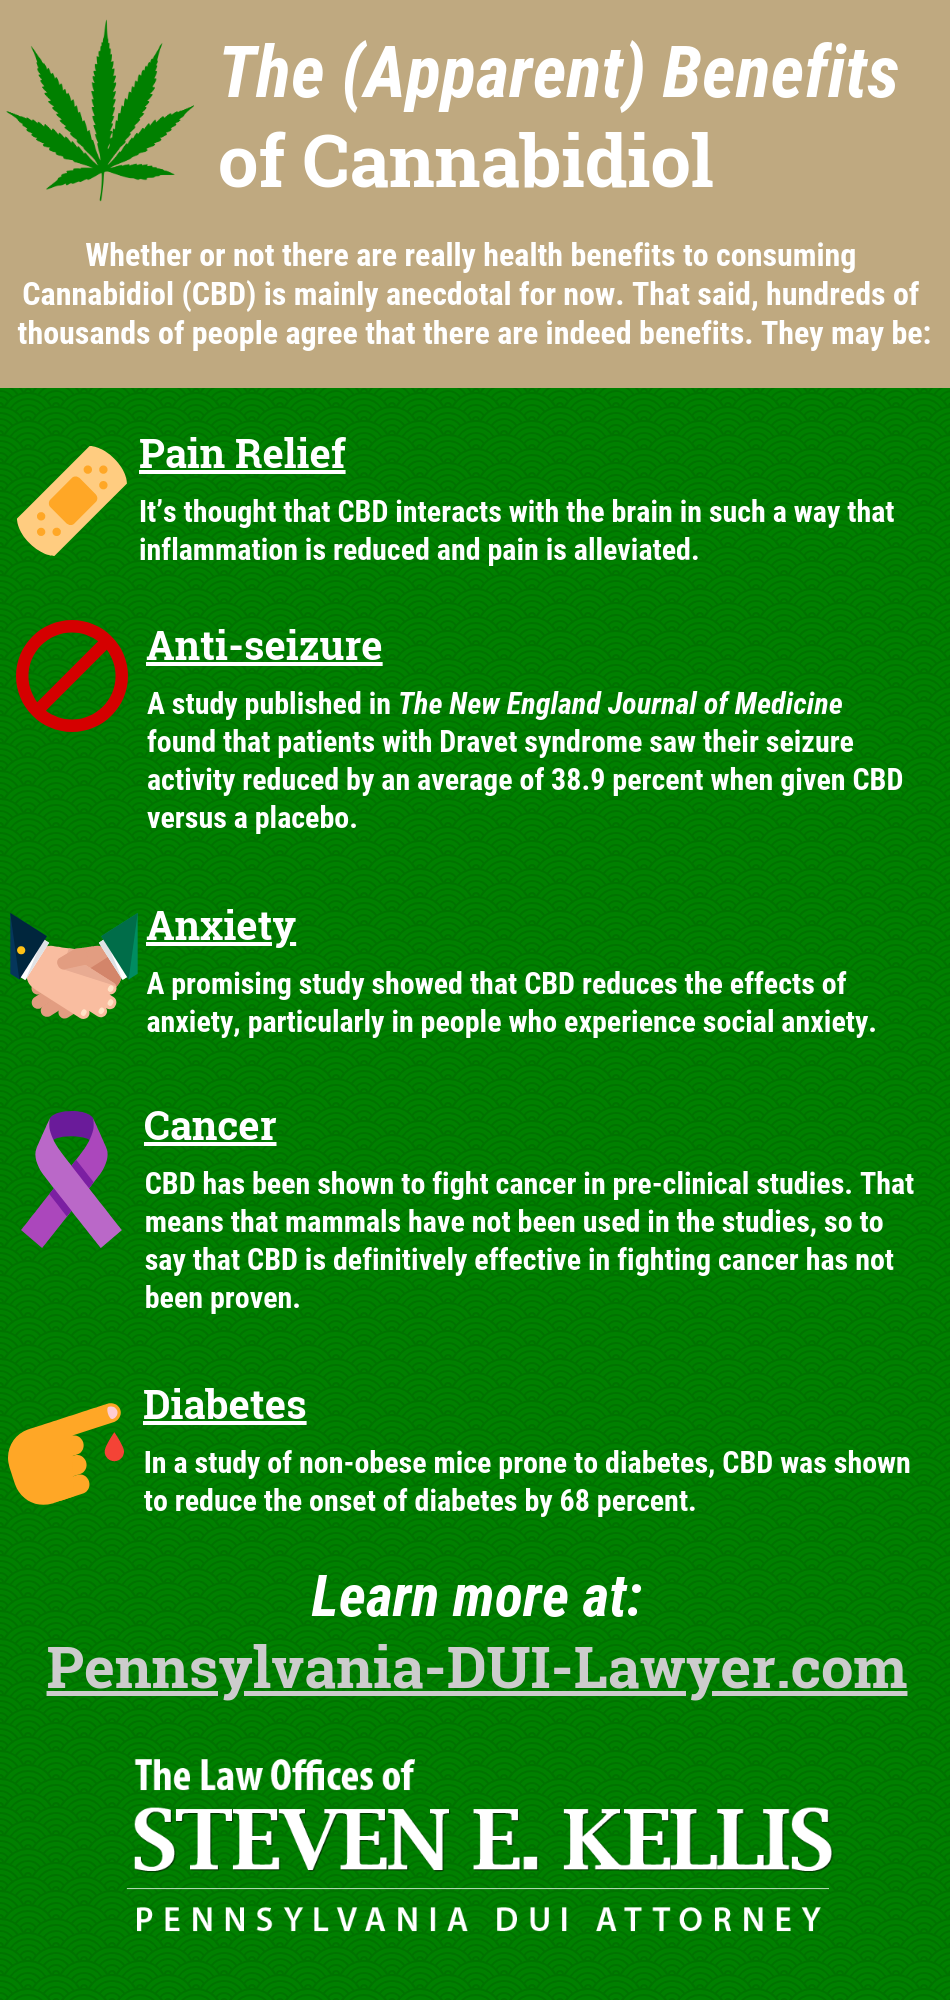 The (Apparent) Benefits of Cannabidiol infographic